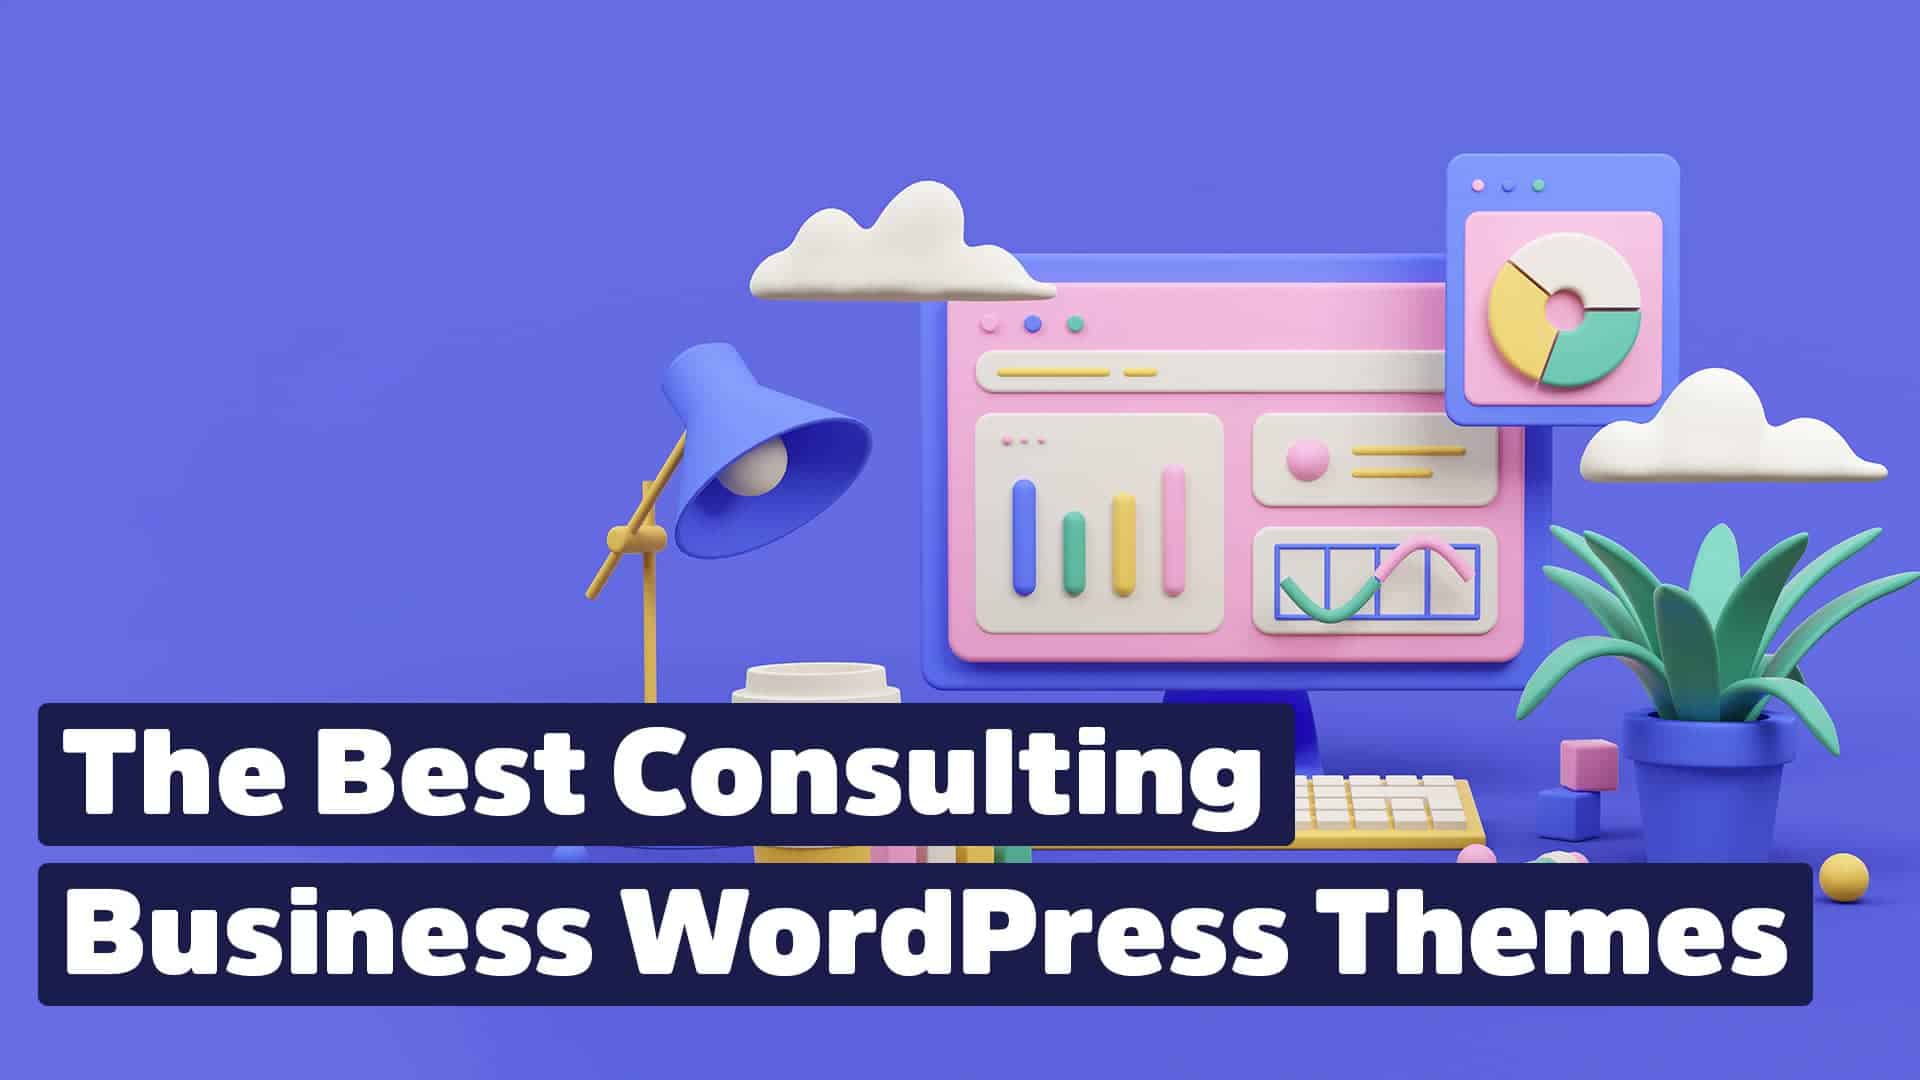 Consulting Business WordPress Themes